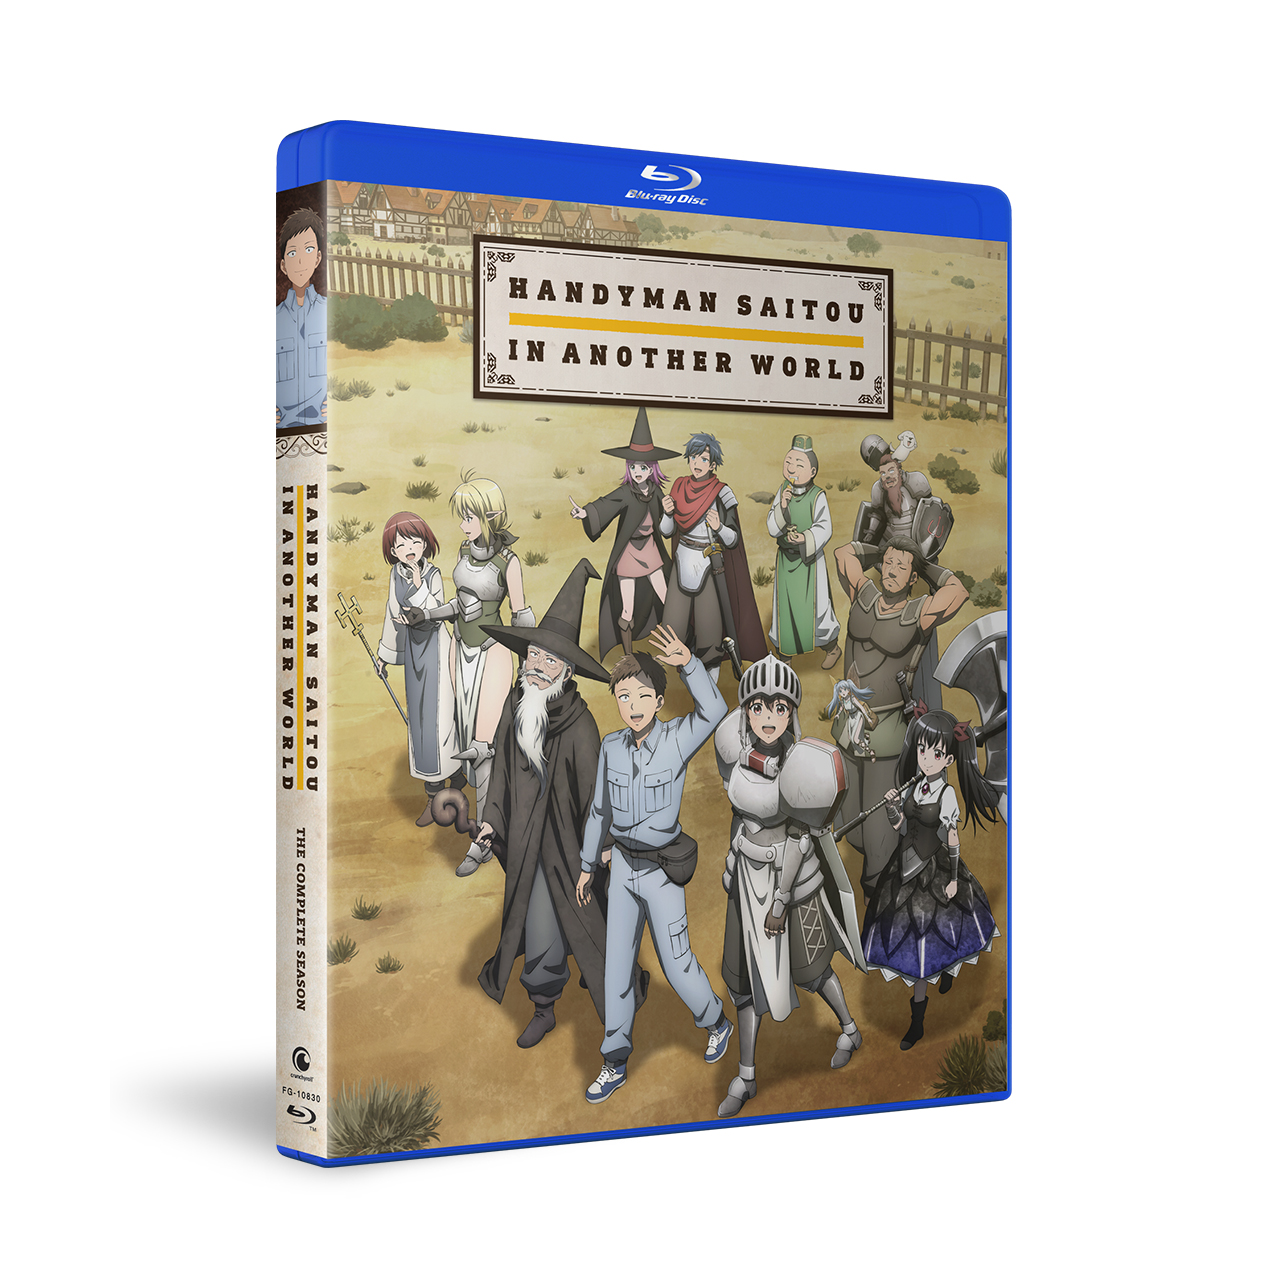 Handyman Saitou in Another World - The Complete Season - Blu-ray image count 2